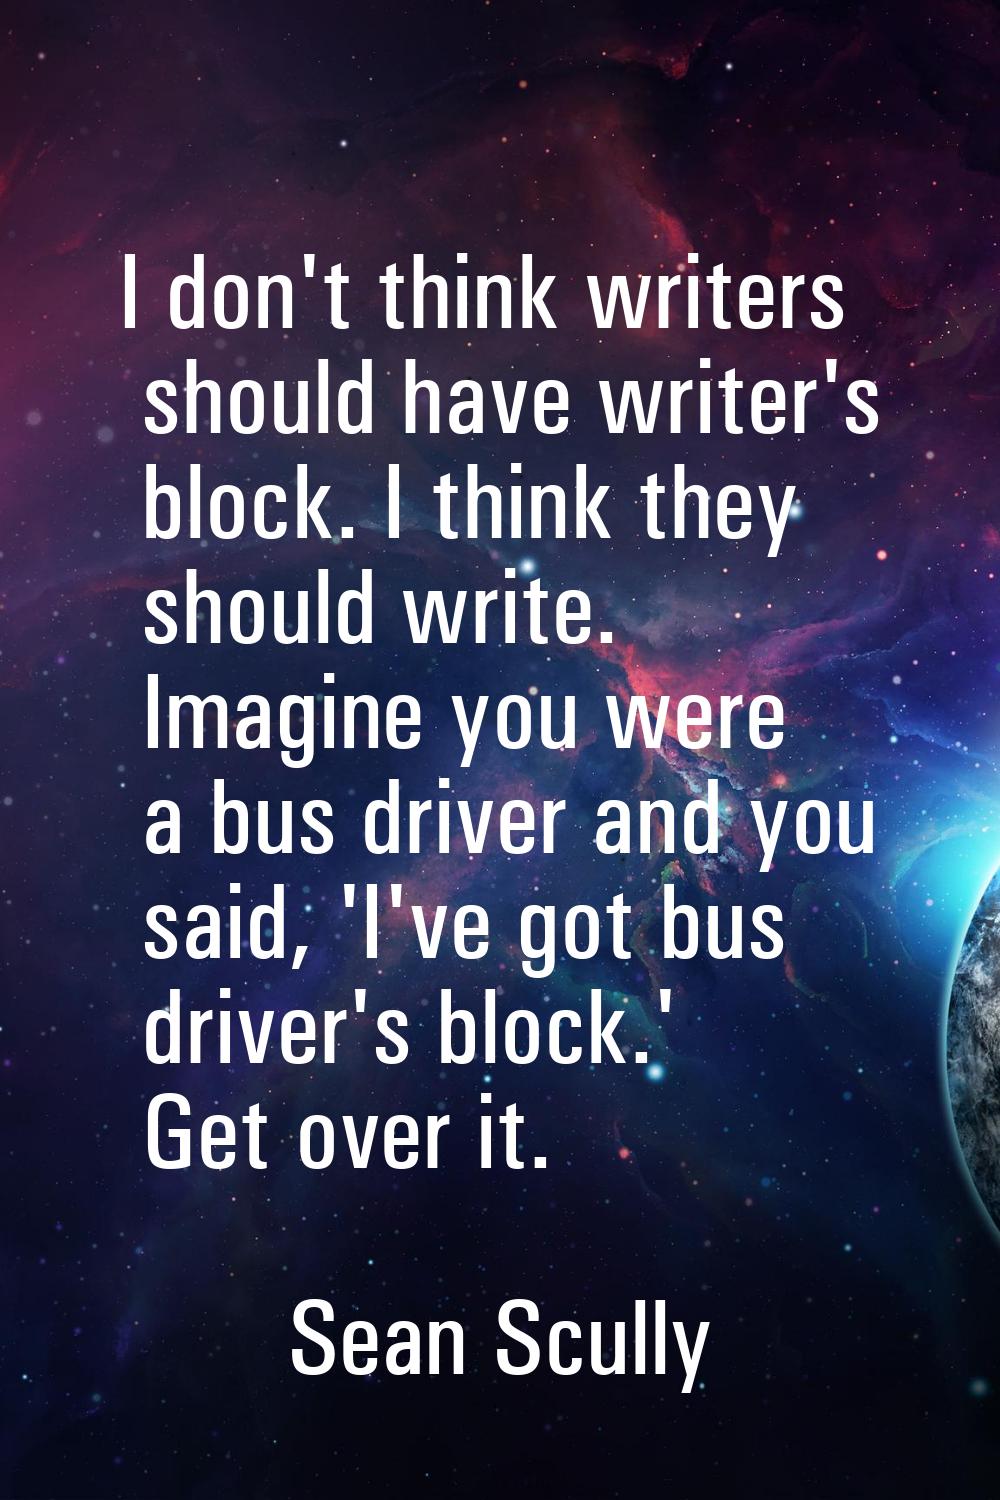 I don't think writers should have writer's block. I think they should write. Imagine you were a bus